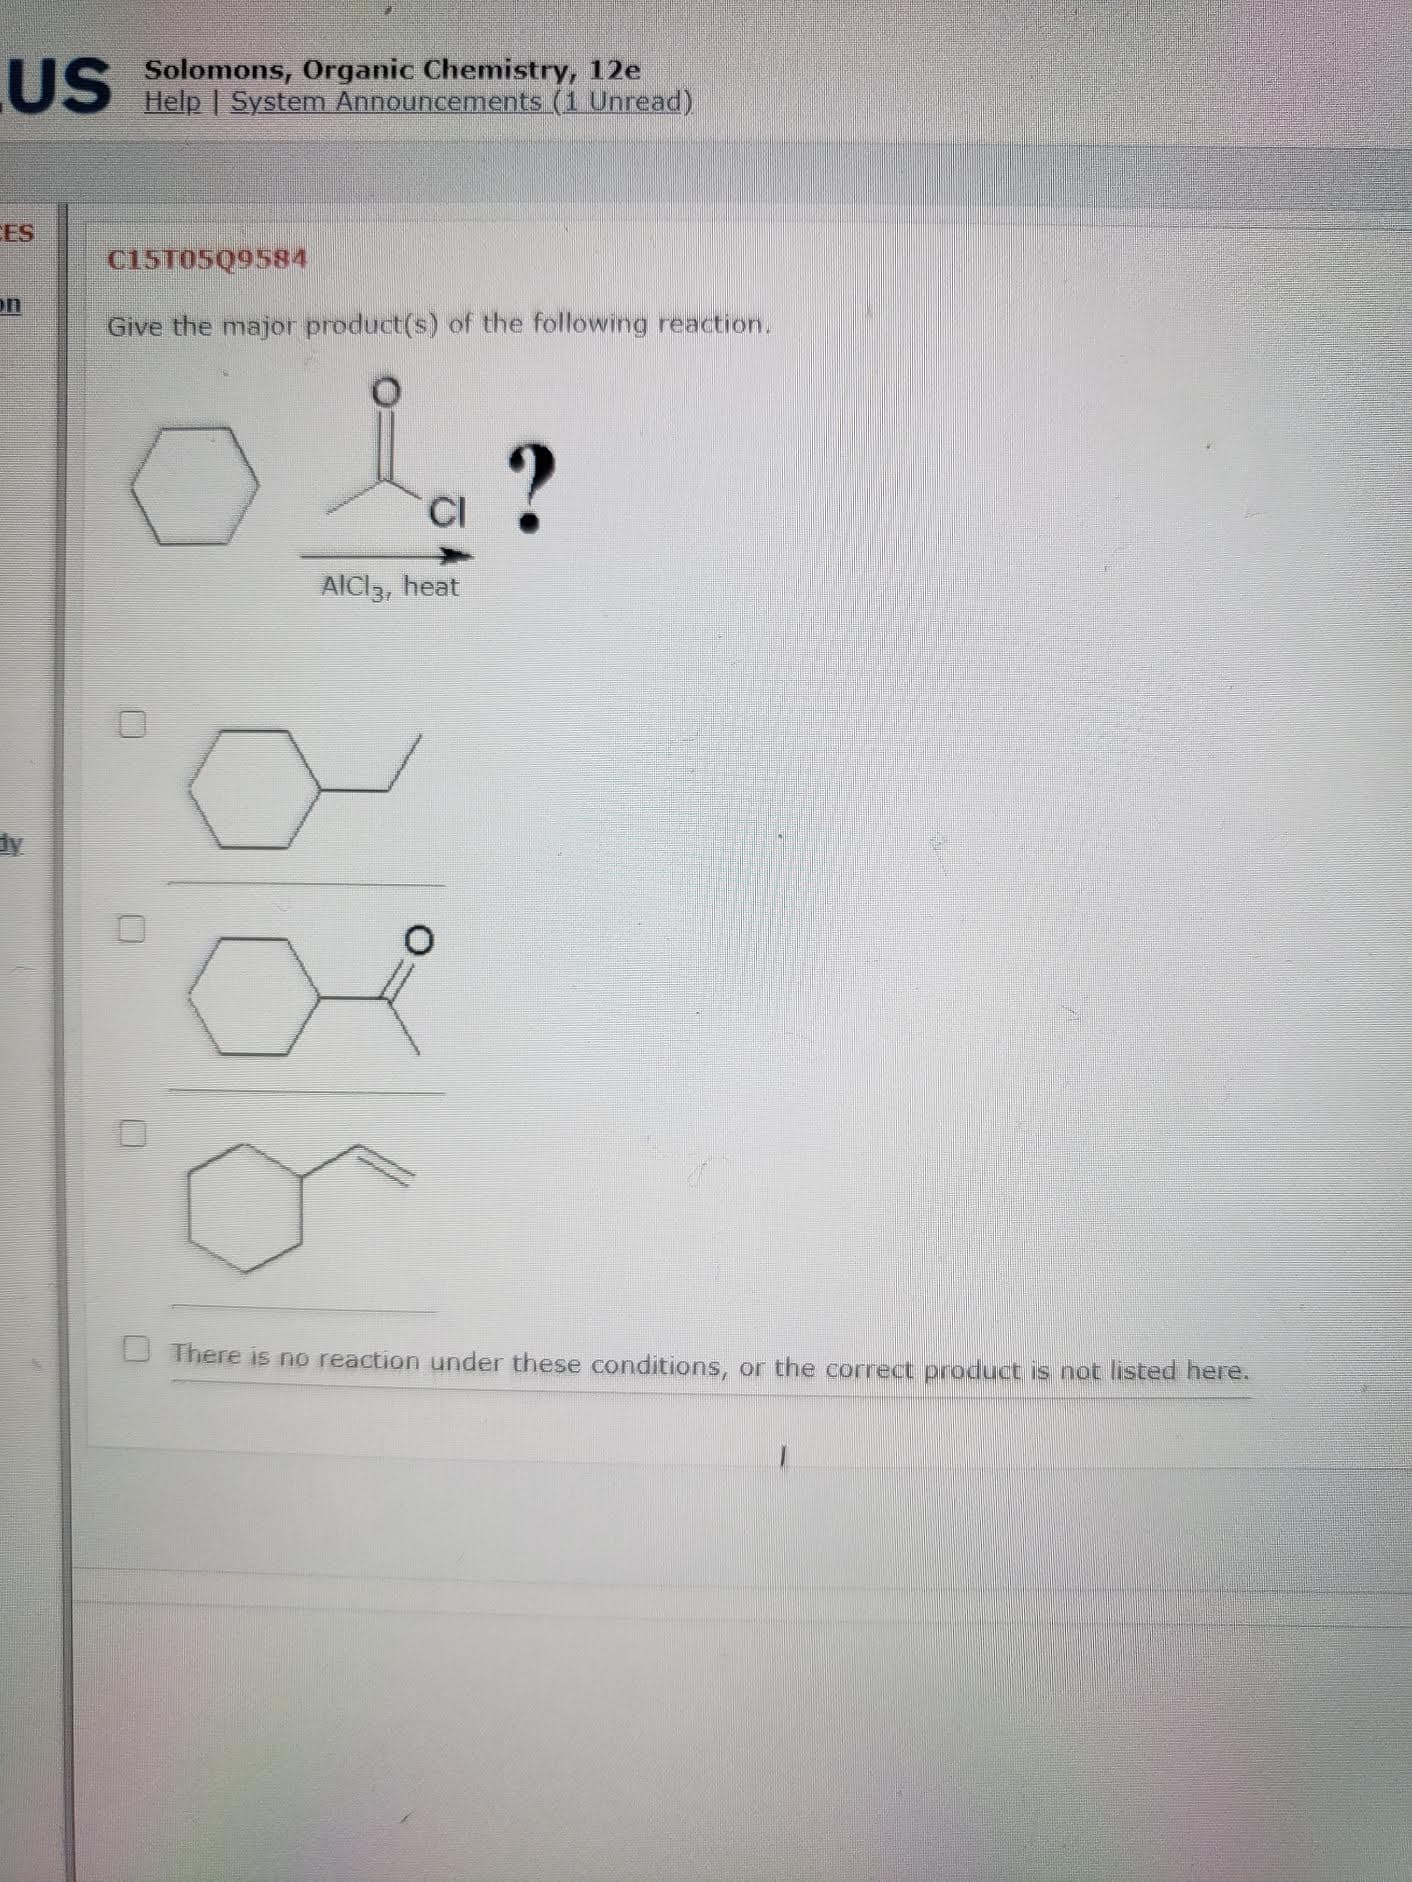 Give the major product(s) of the following reaction.
?
CI
AlCl3, heat
There is no reaction under these conditions, or the correct product is not listed here.
